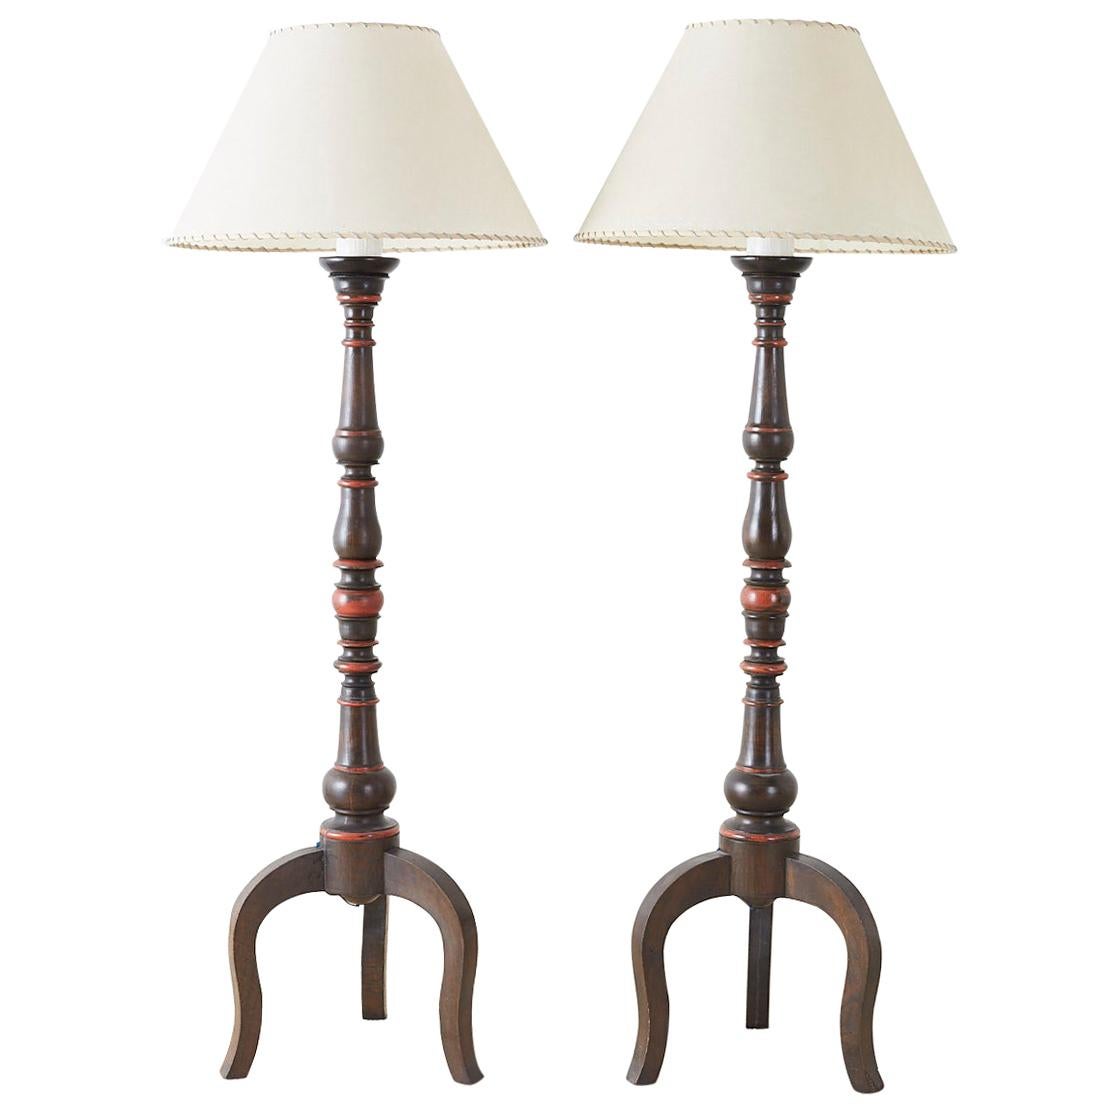 Pair of Spanish Colonial Style Wooden Candlestick Floor Lamps